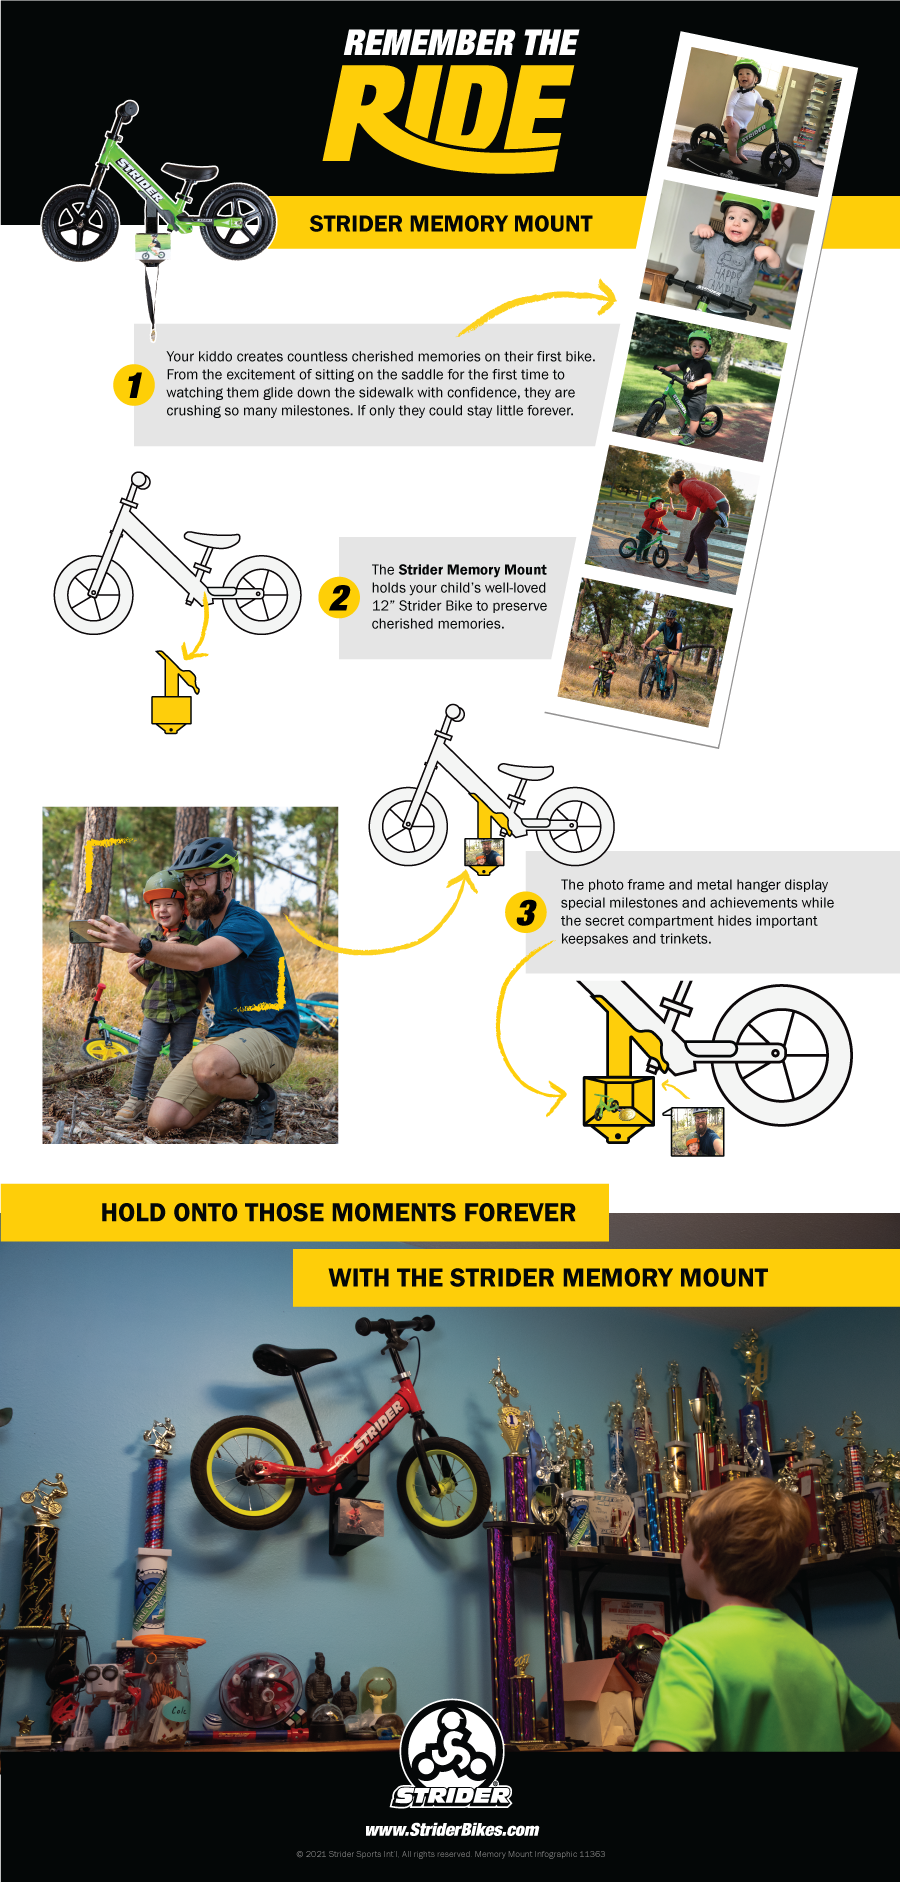 Infographic describing how the Memory Mount helps preserve those precious memories from your child's 12 inch Strider Bike